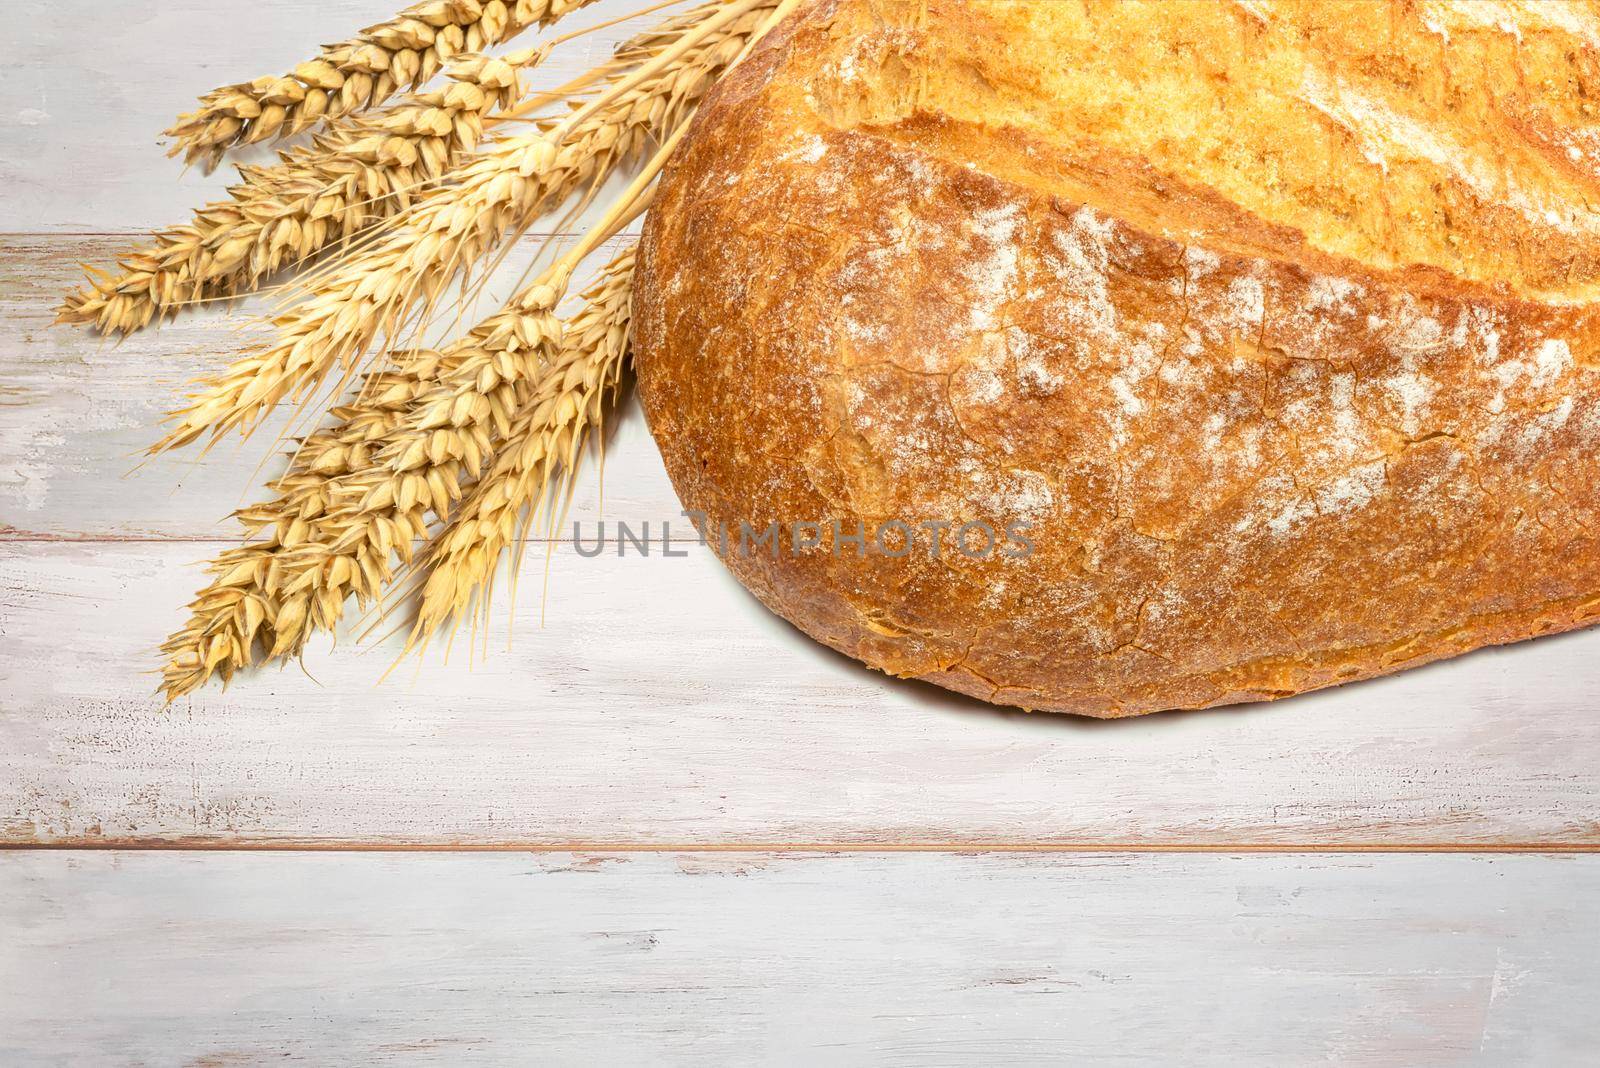 Rustic composition of fresh bread by wdnet_studio